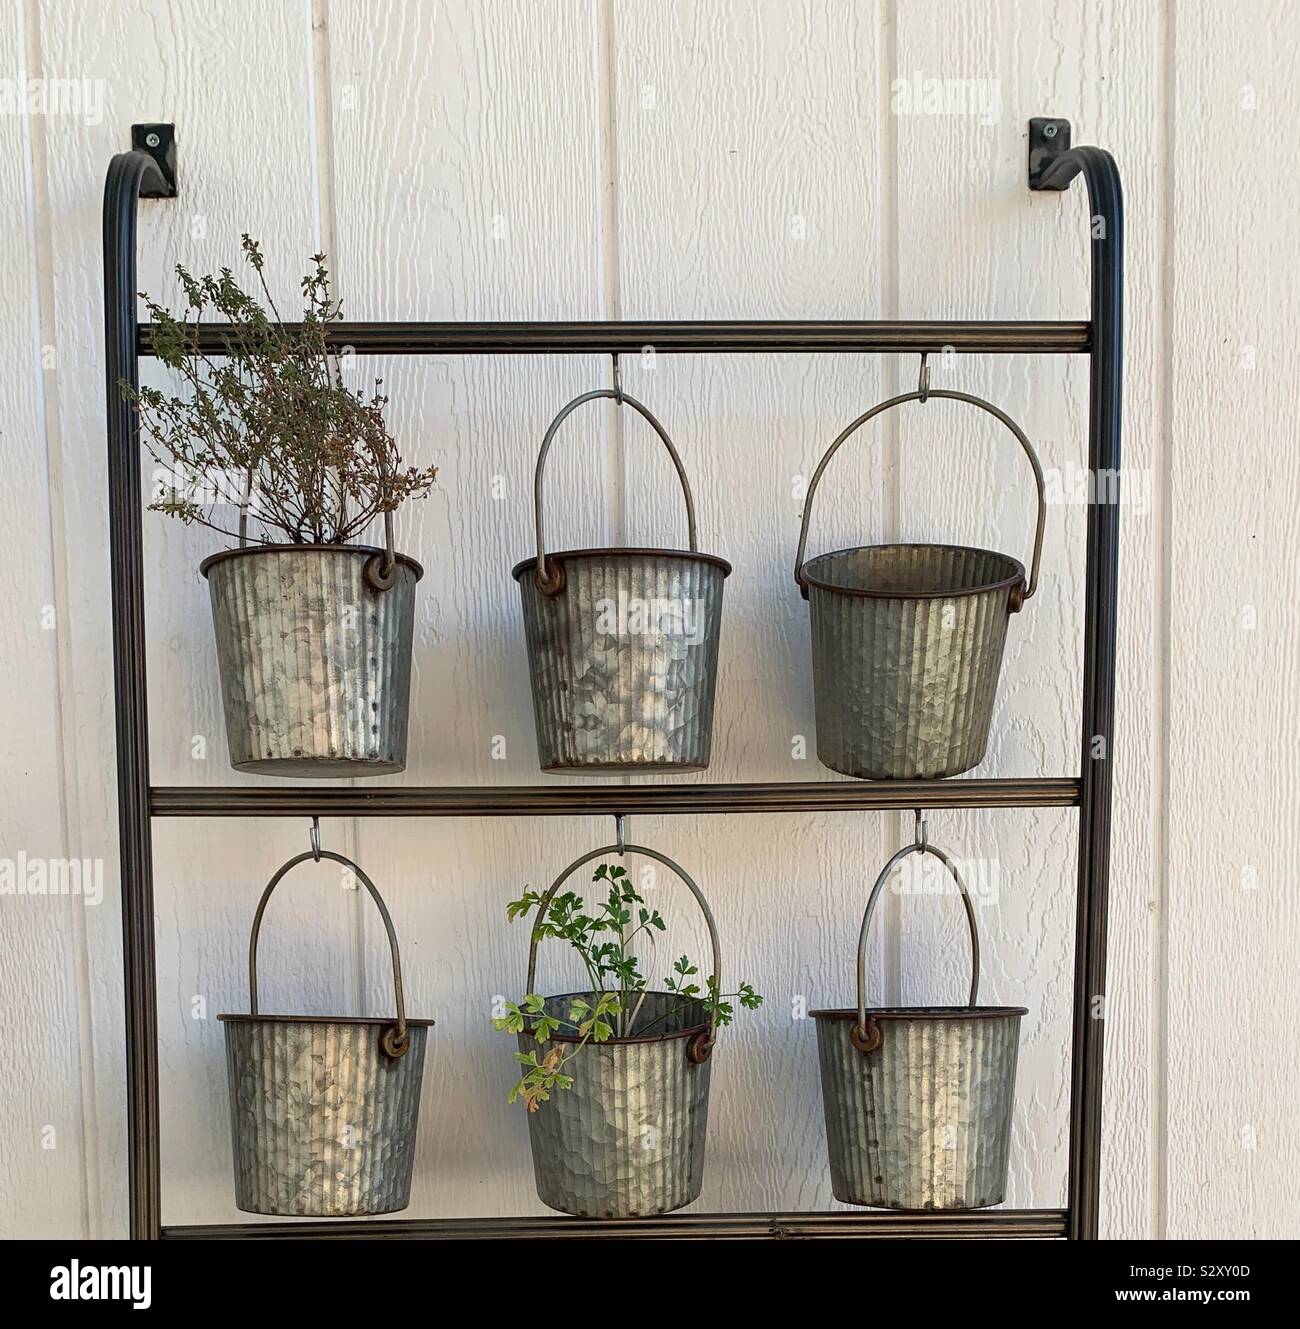 A Wrought iron metal decor displayed on a wooden barn outside with flowering pots filled with herbs Stock Photo